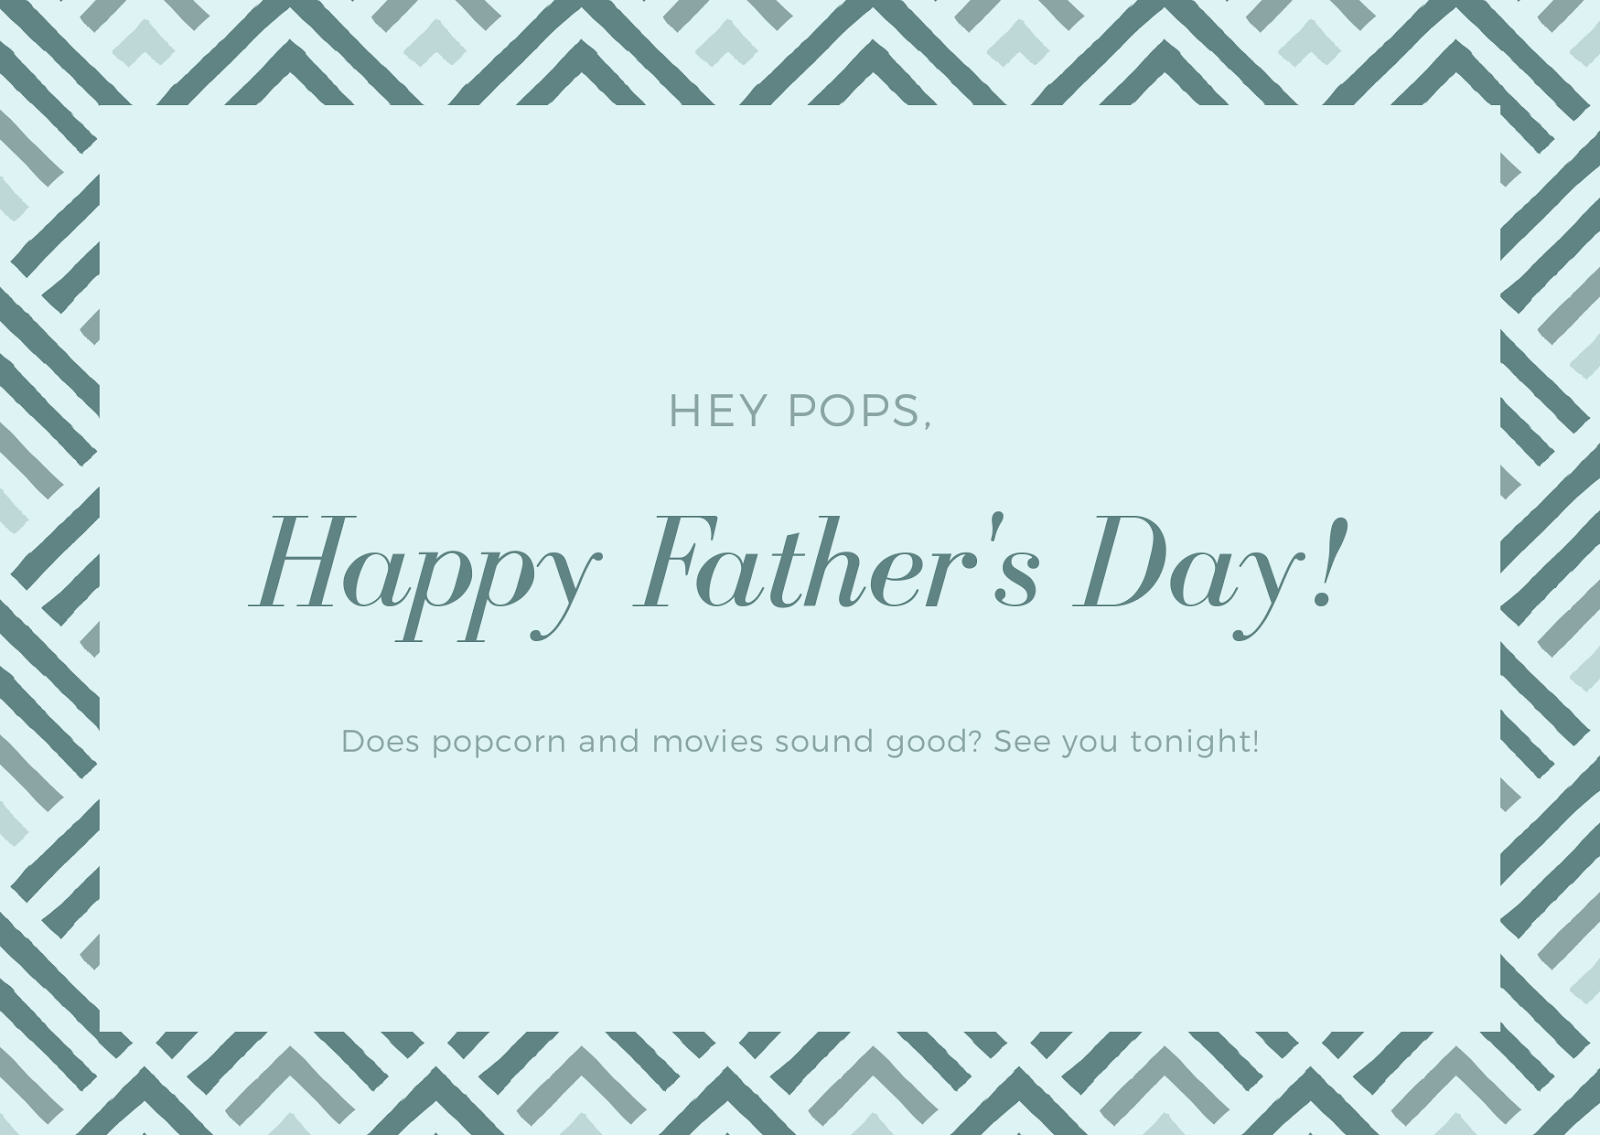 Happy fathers day images free download in hd